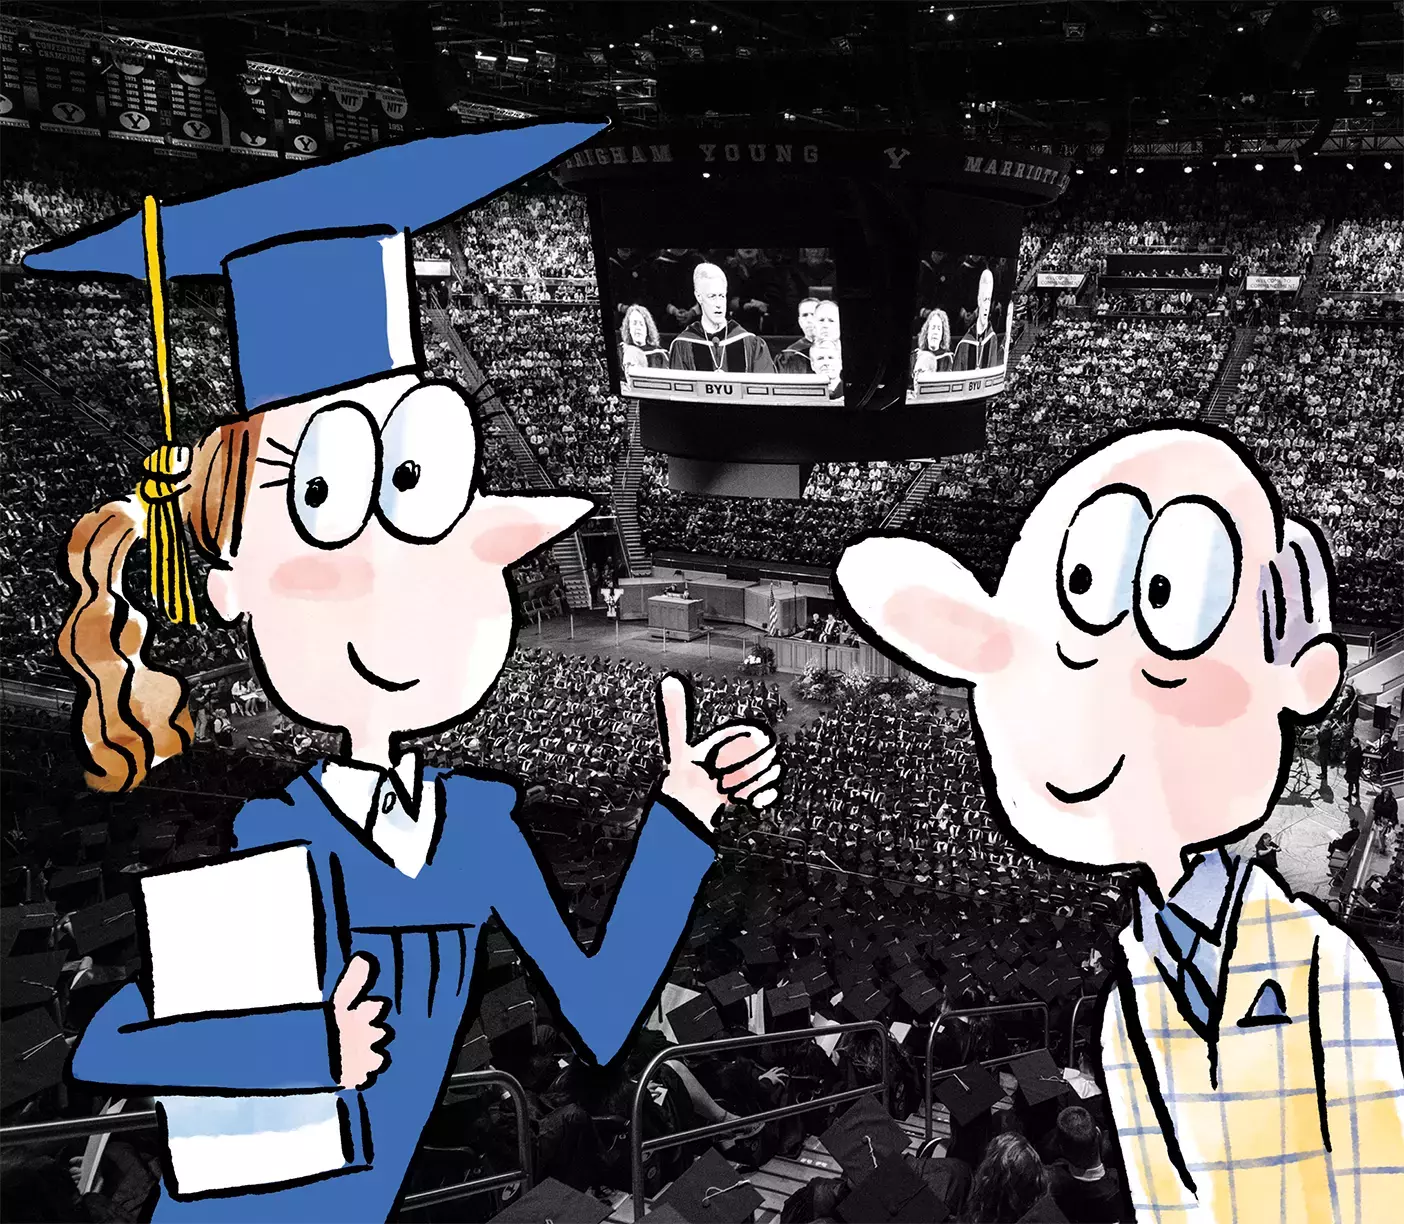 A dad in plaid and a grad in cap and gown gives a thumbs-up from the far seats of the Marriott Center during graduation.